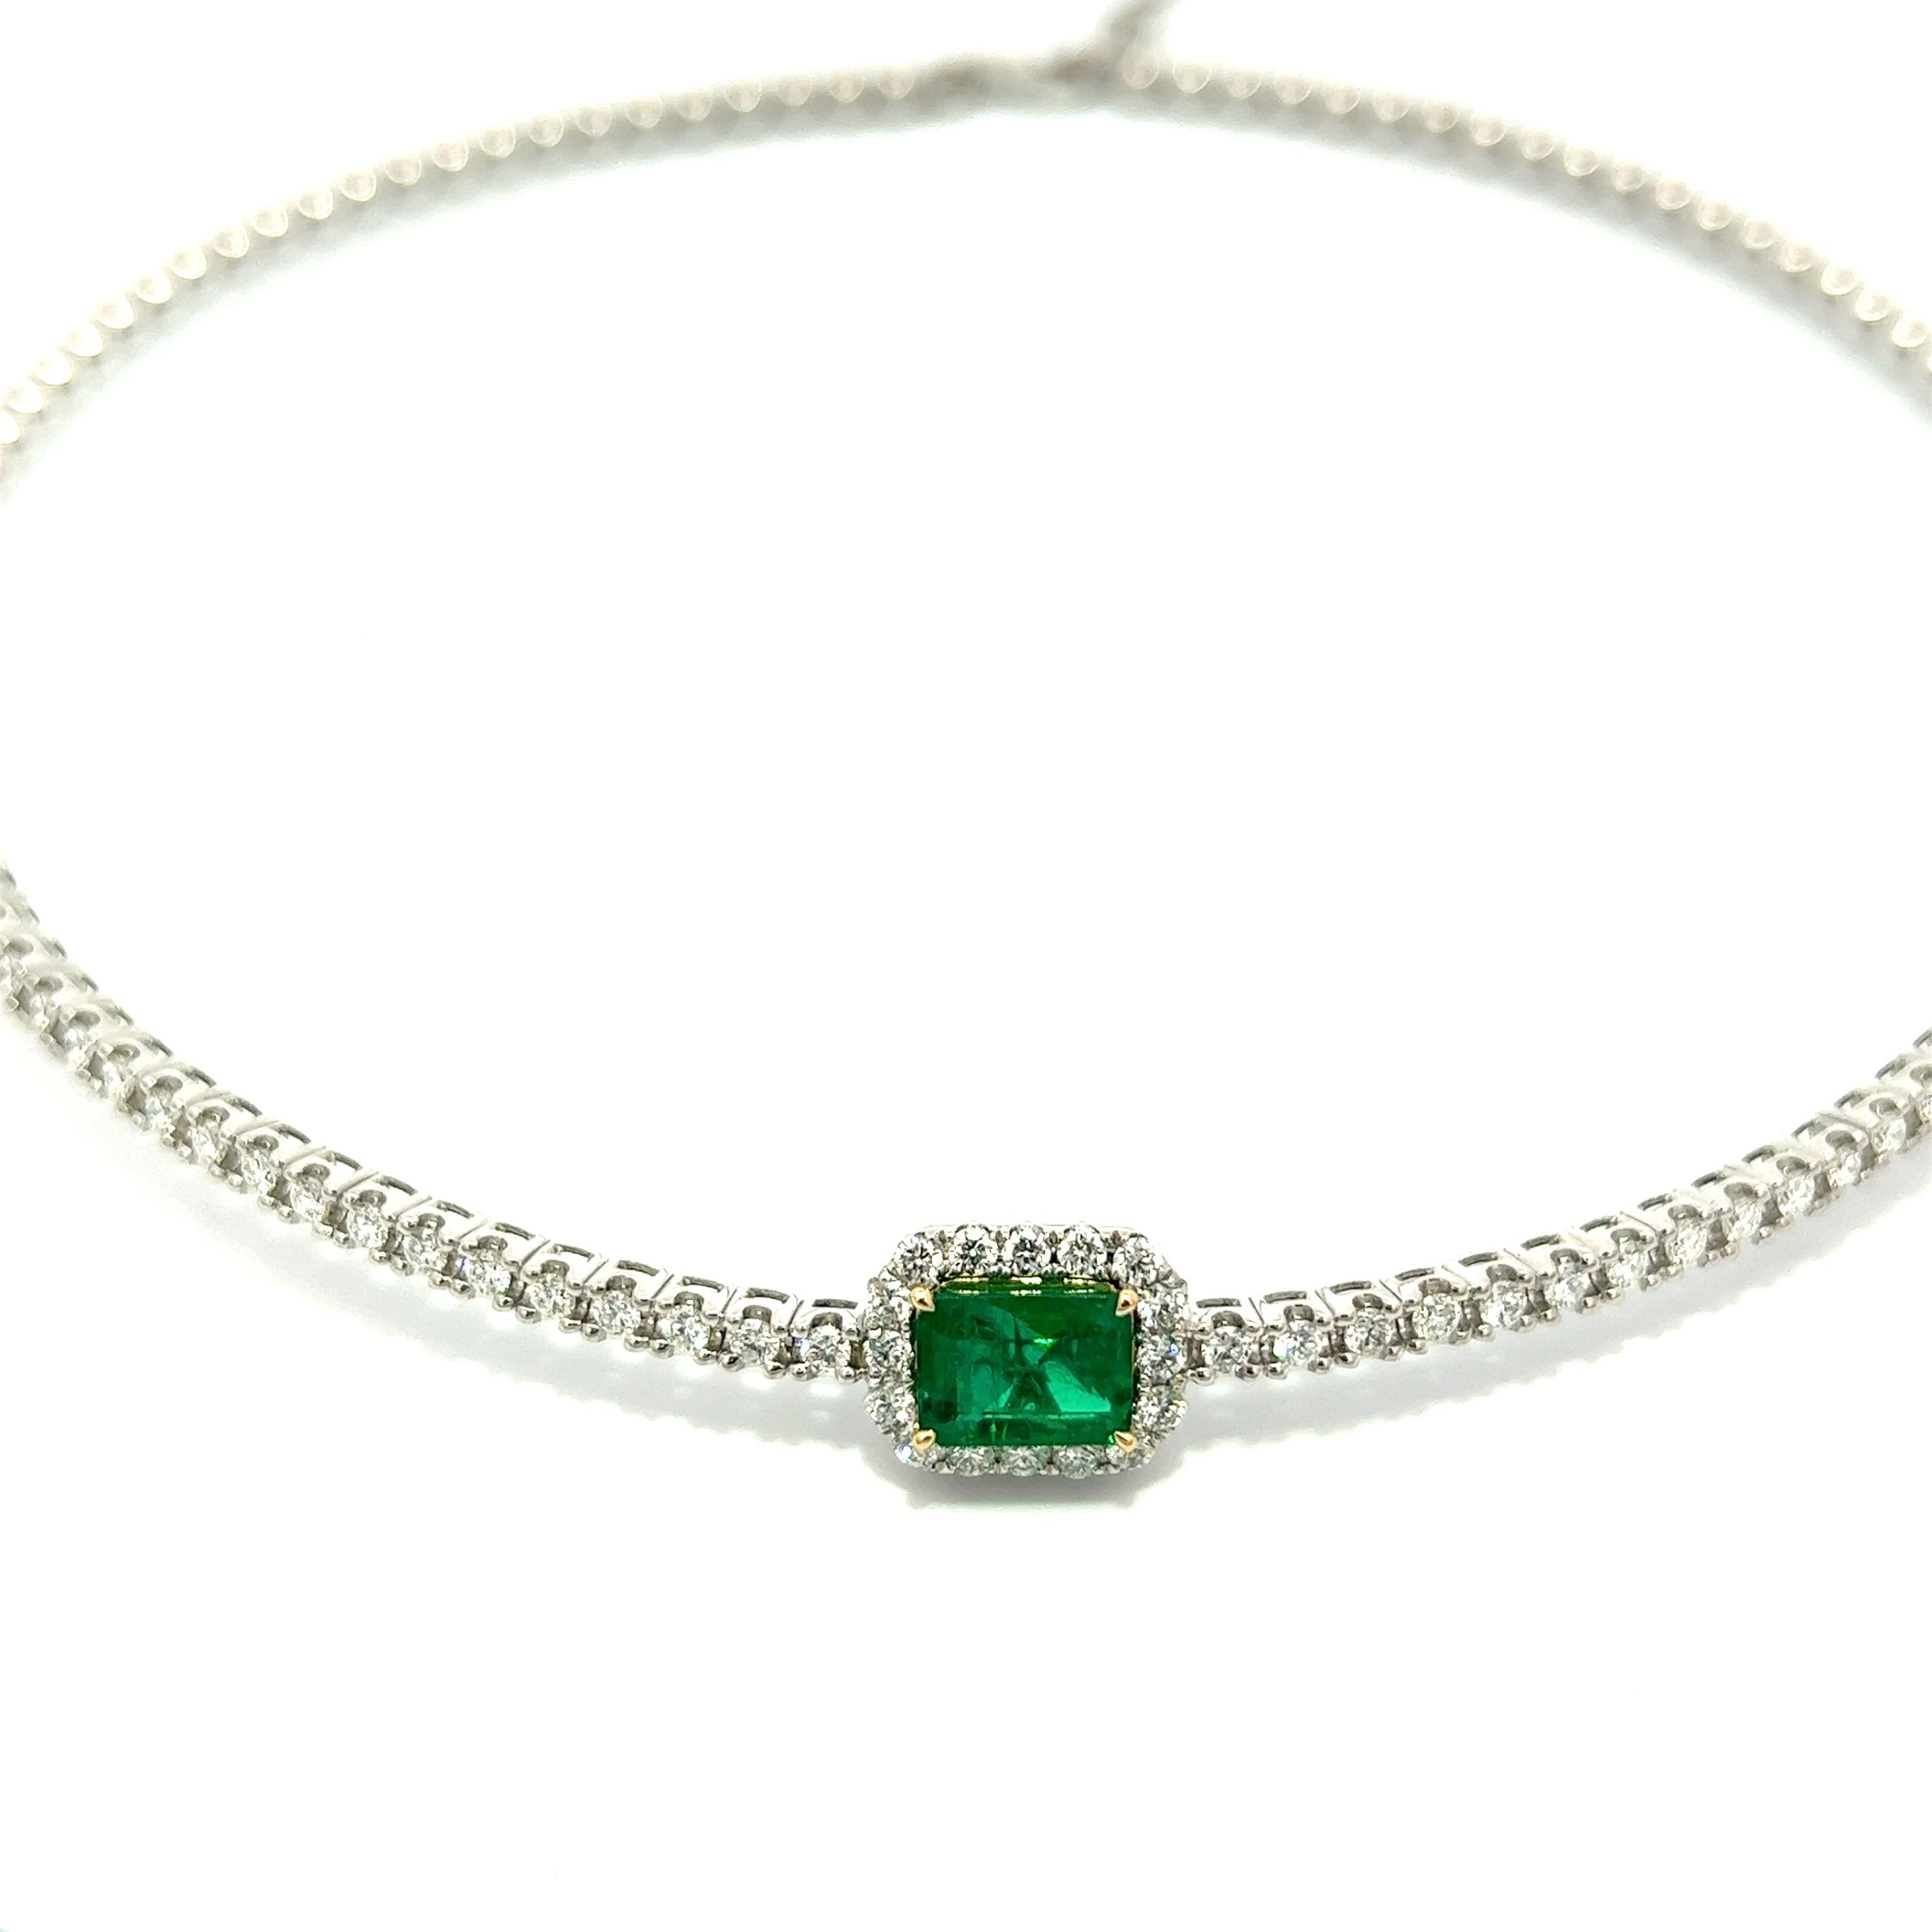 Add a touch of elegance to your jewelry collection with this stunning choker featuring a breathtaking Colombian emerald in an emerald cut, accompanied by diamonds on either side. The emerald has a weight of 1.67 CT and the diamonds are equivalent to